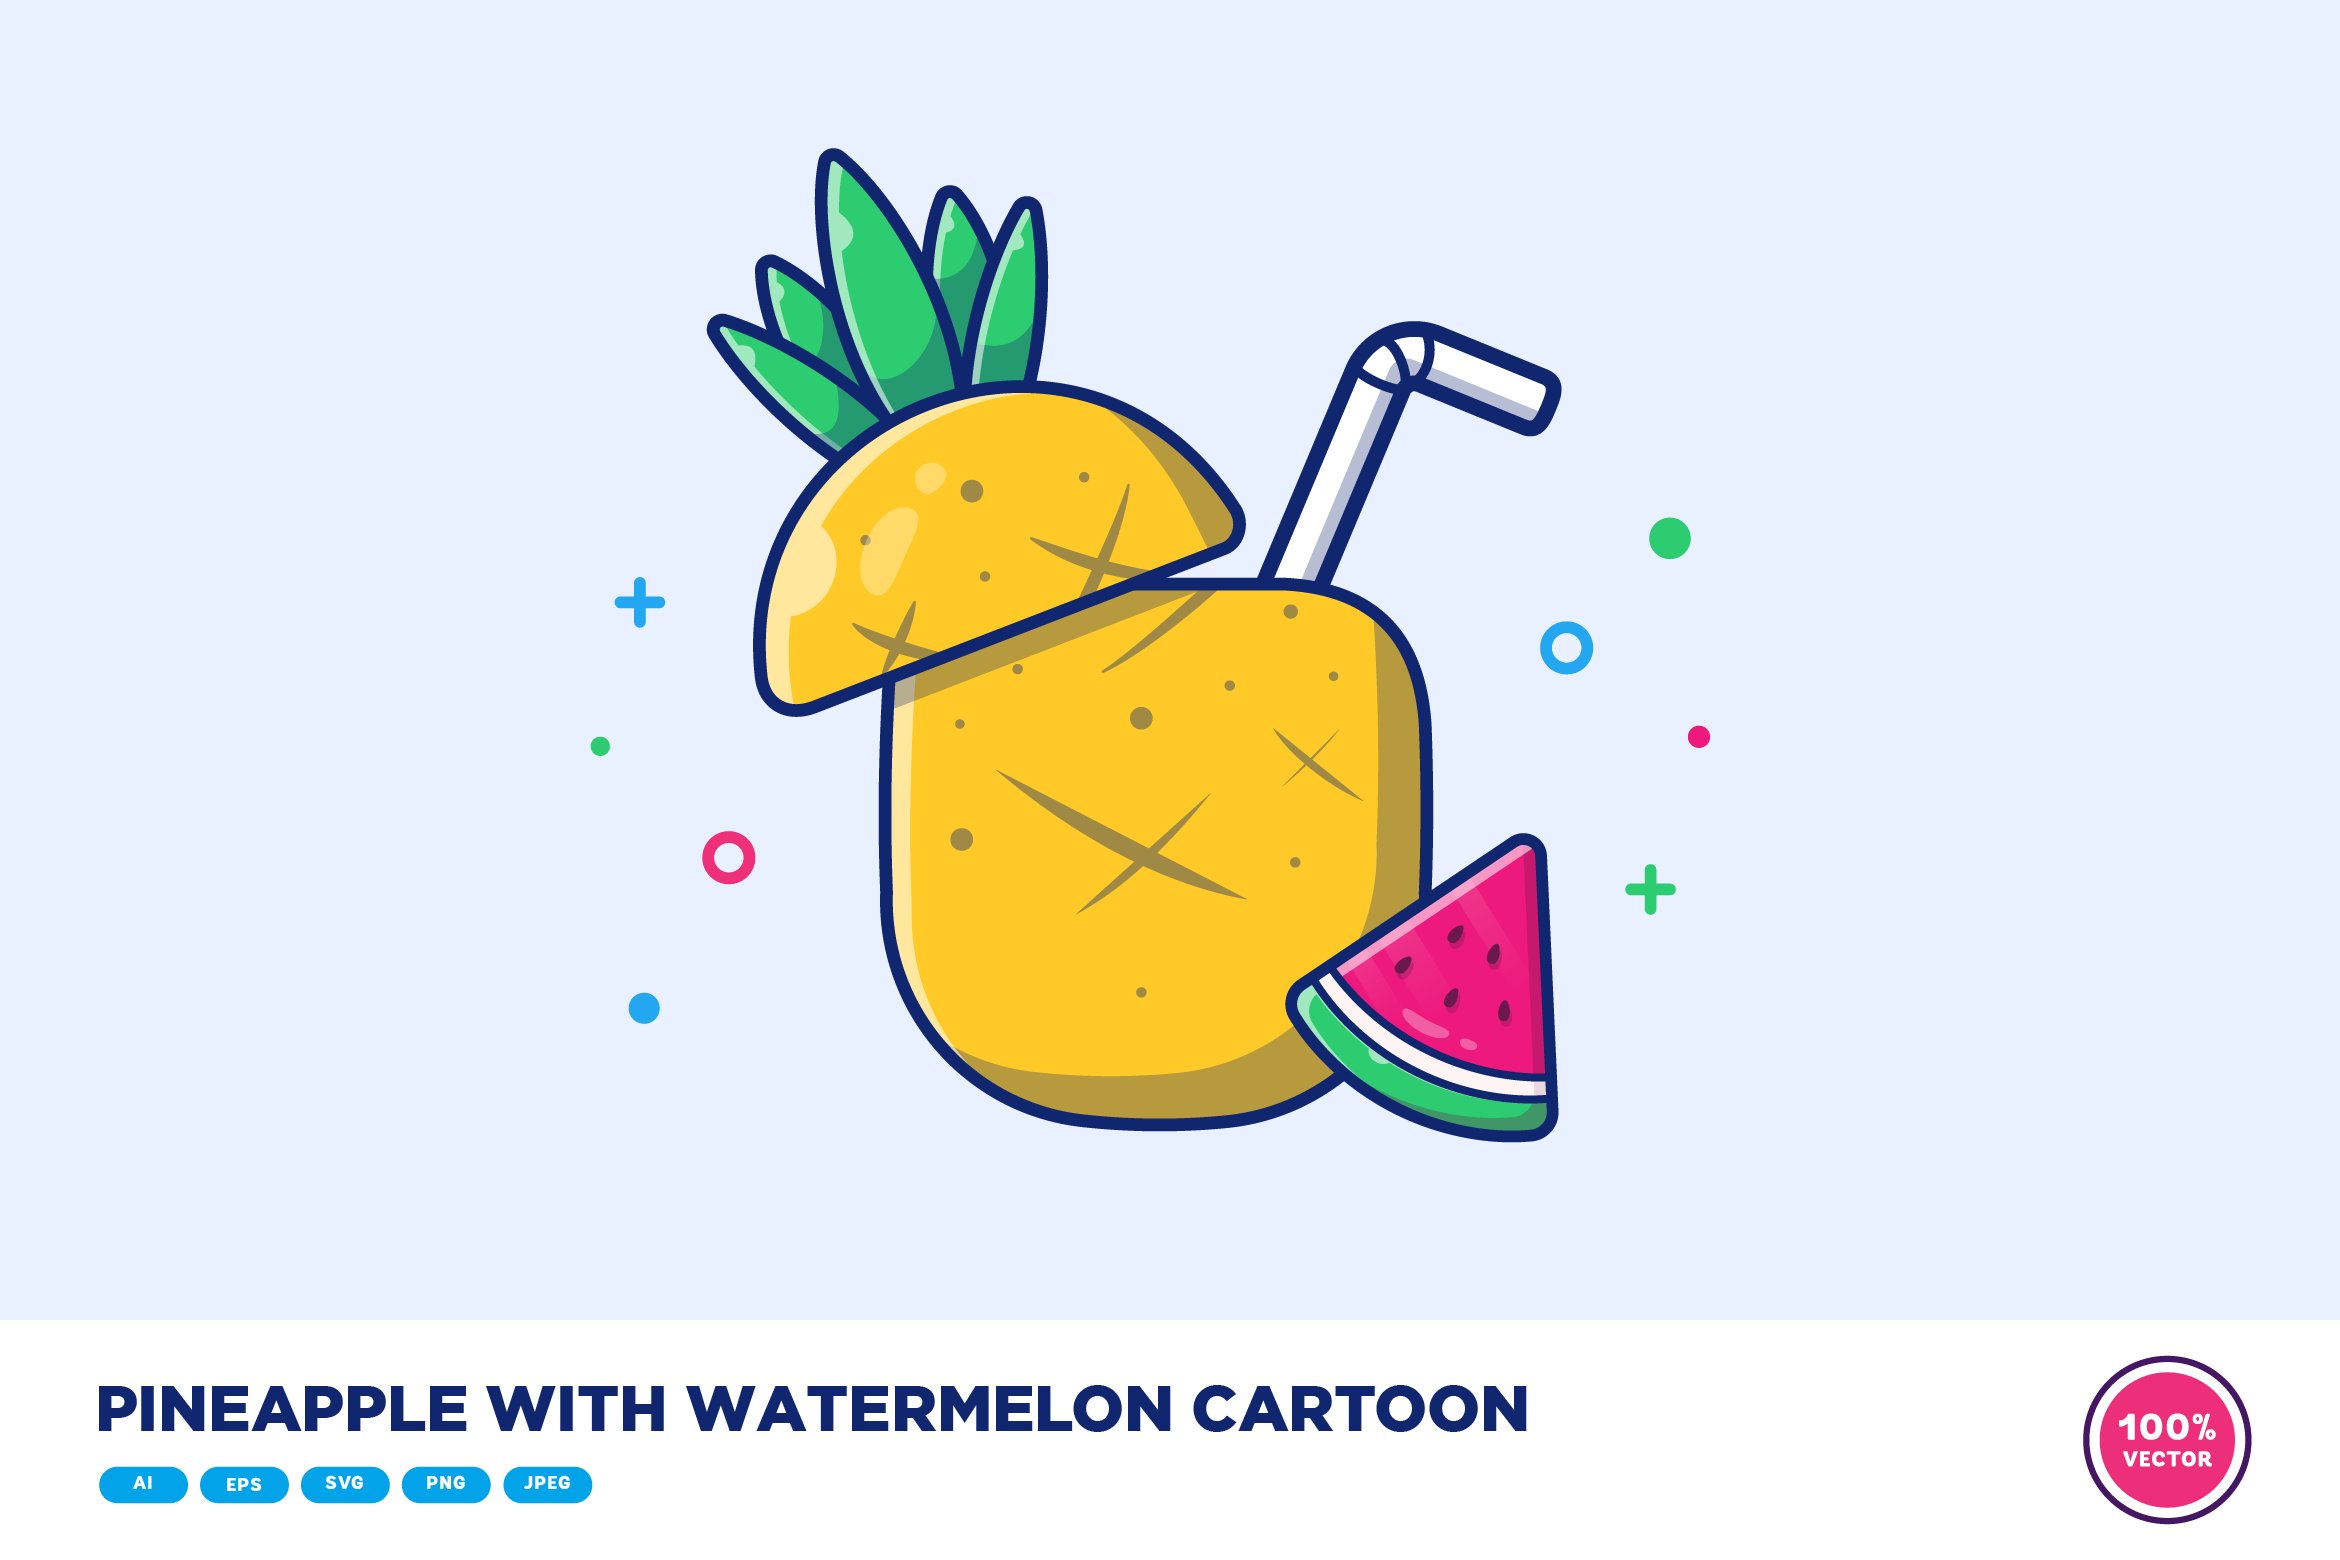 Pineapple With Watermelon Cartoon cover image.